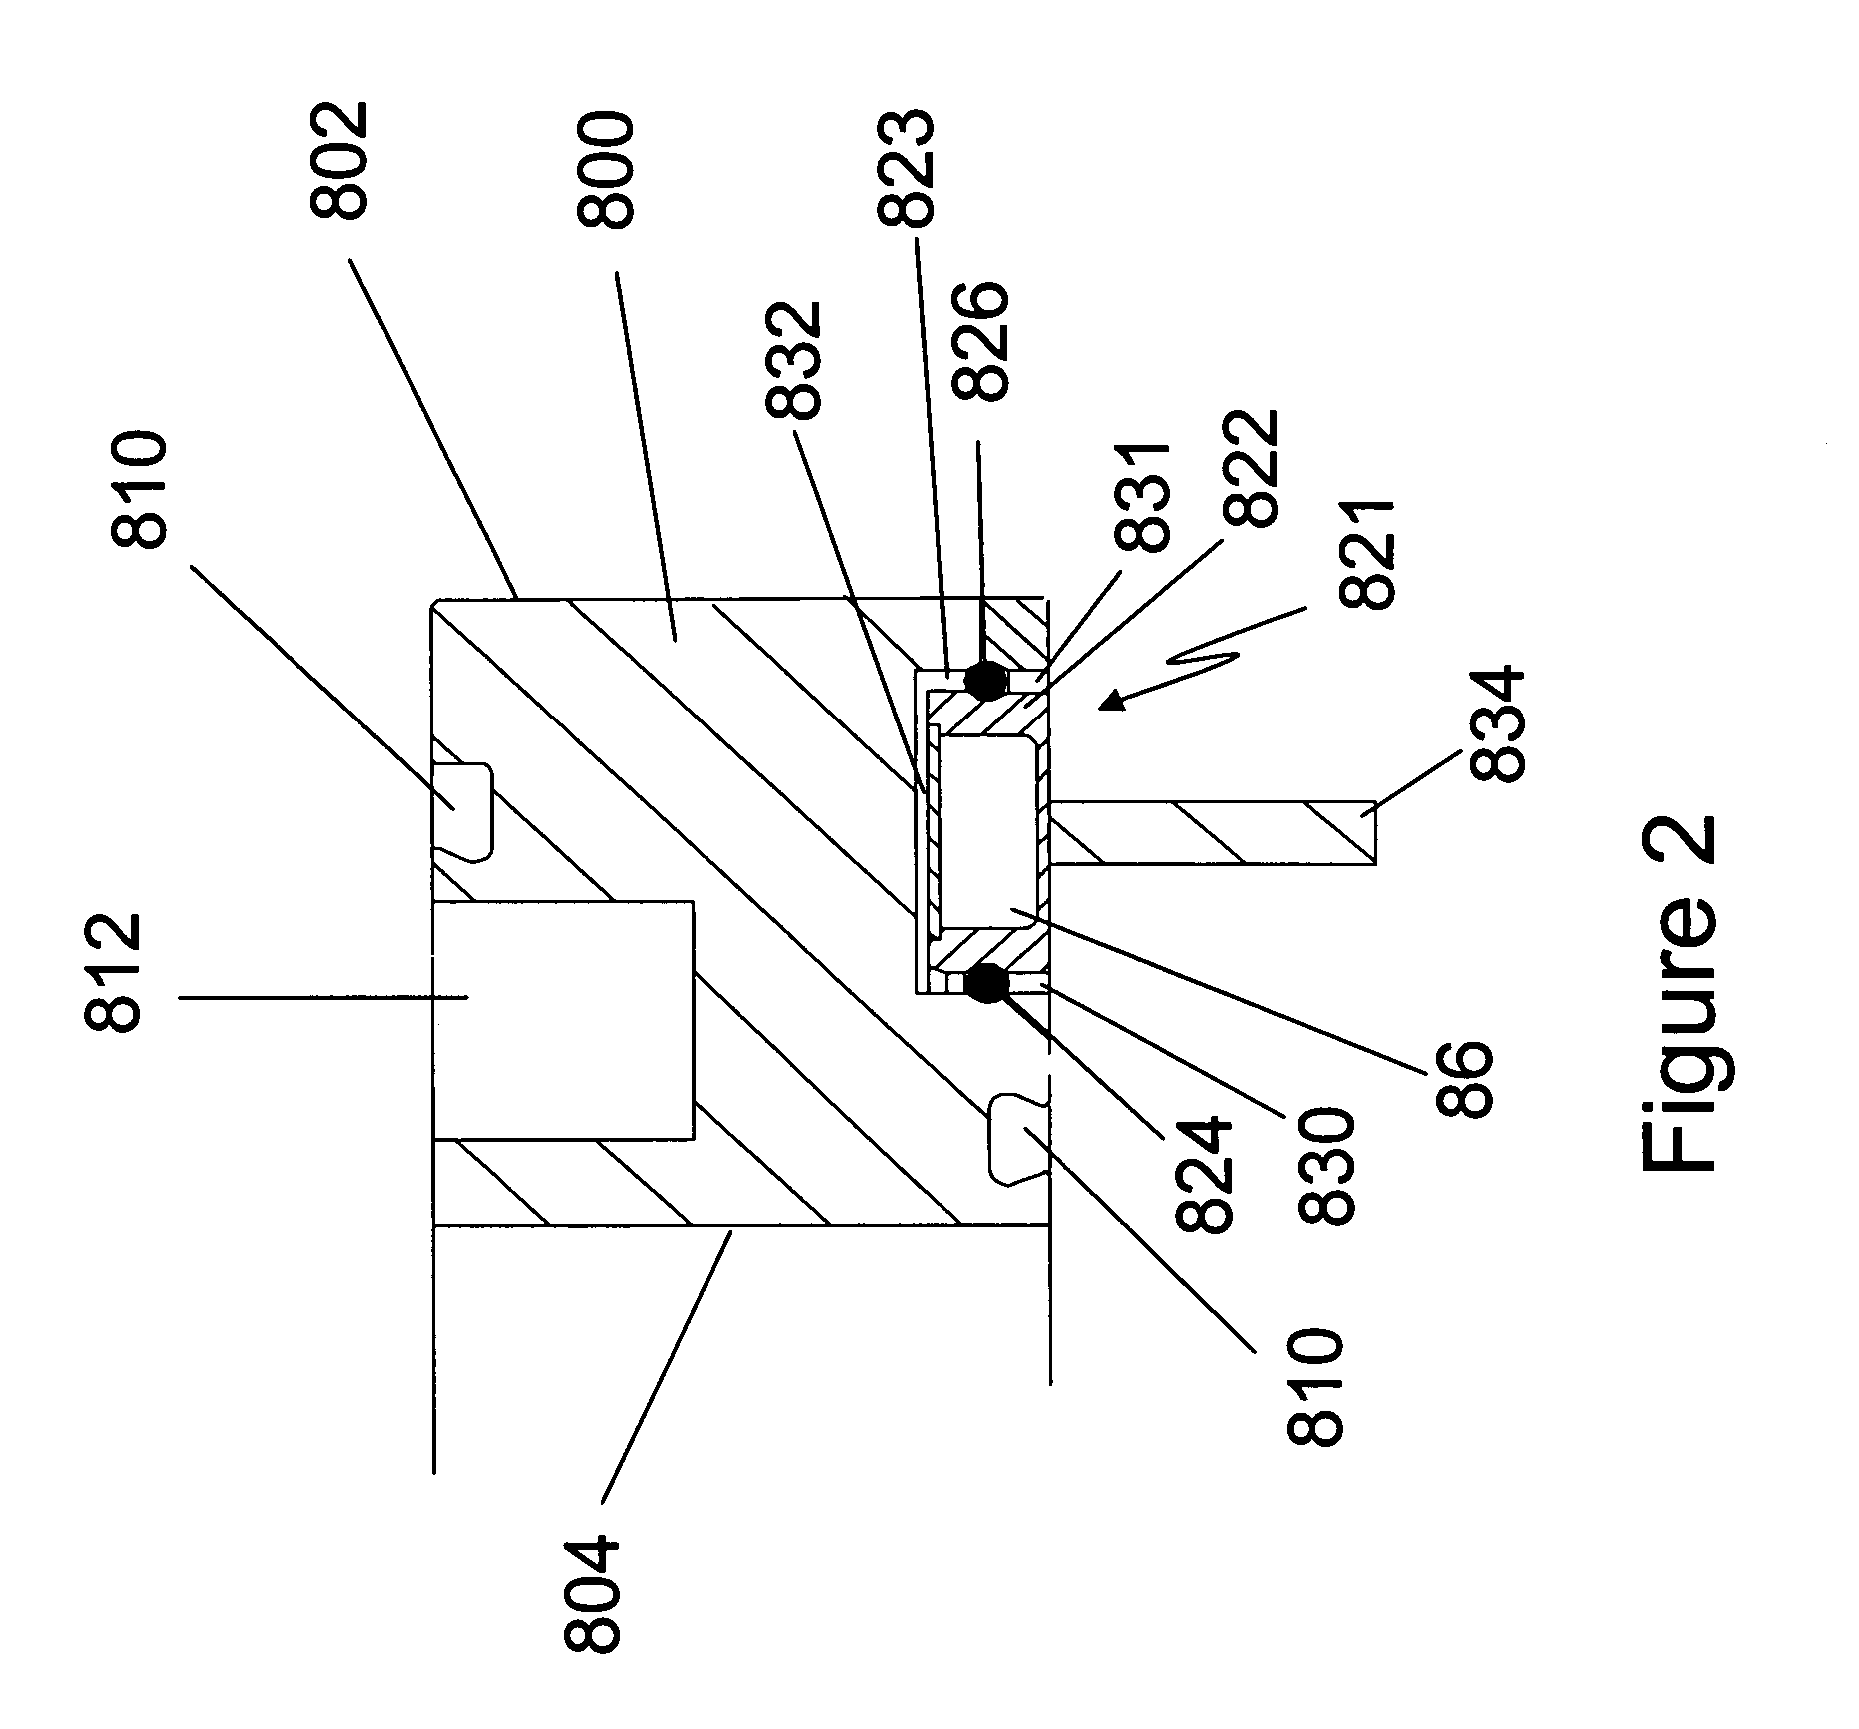 Reactor design for reduced particulate generation